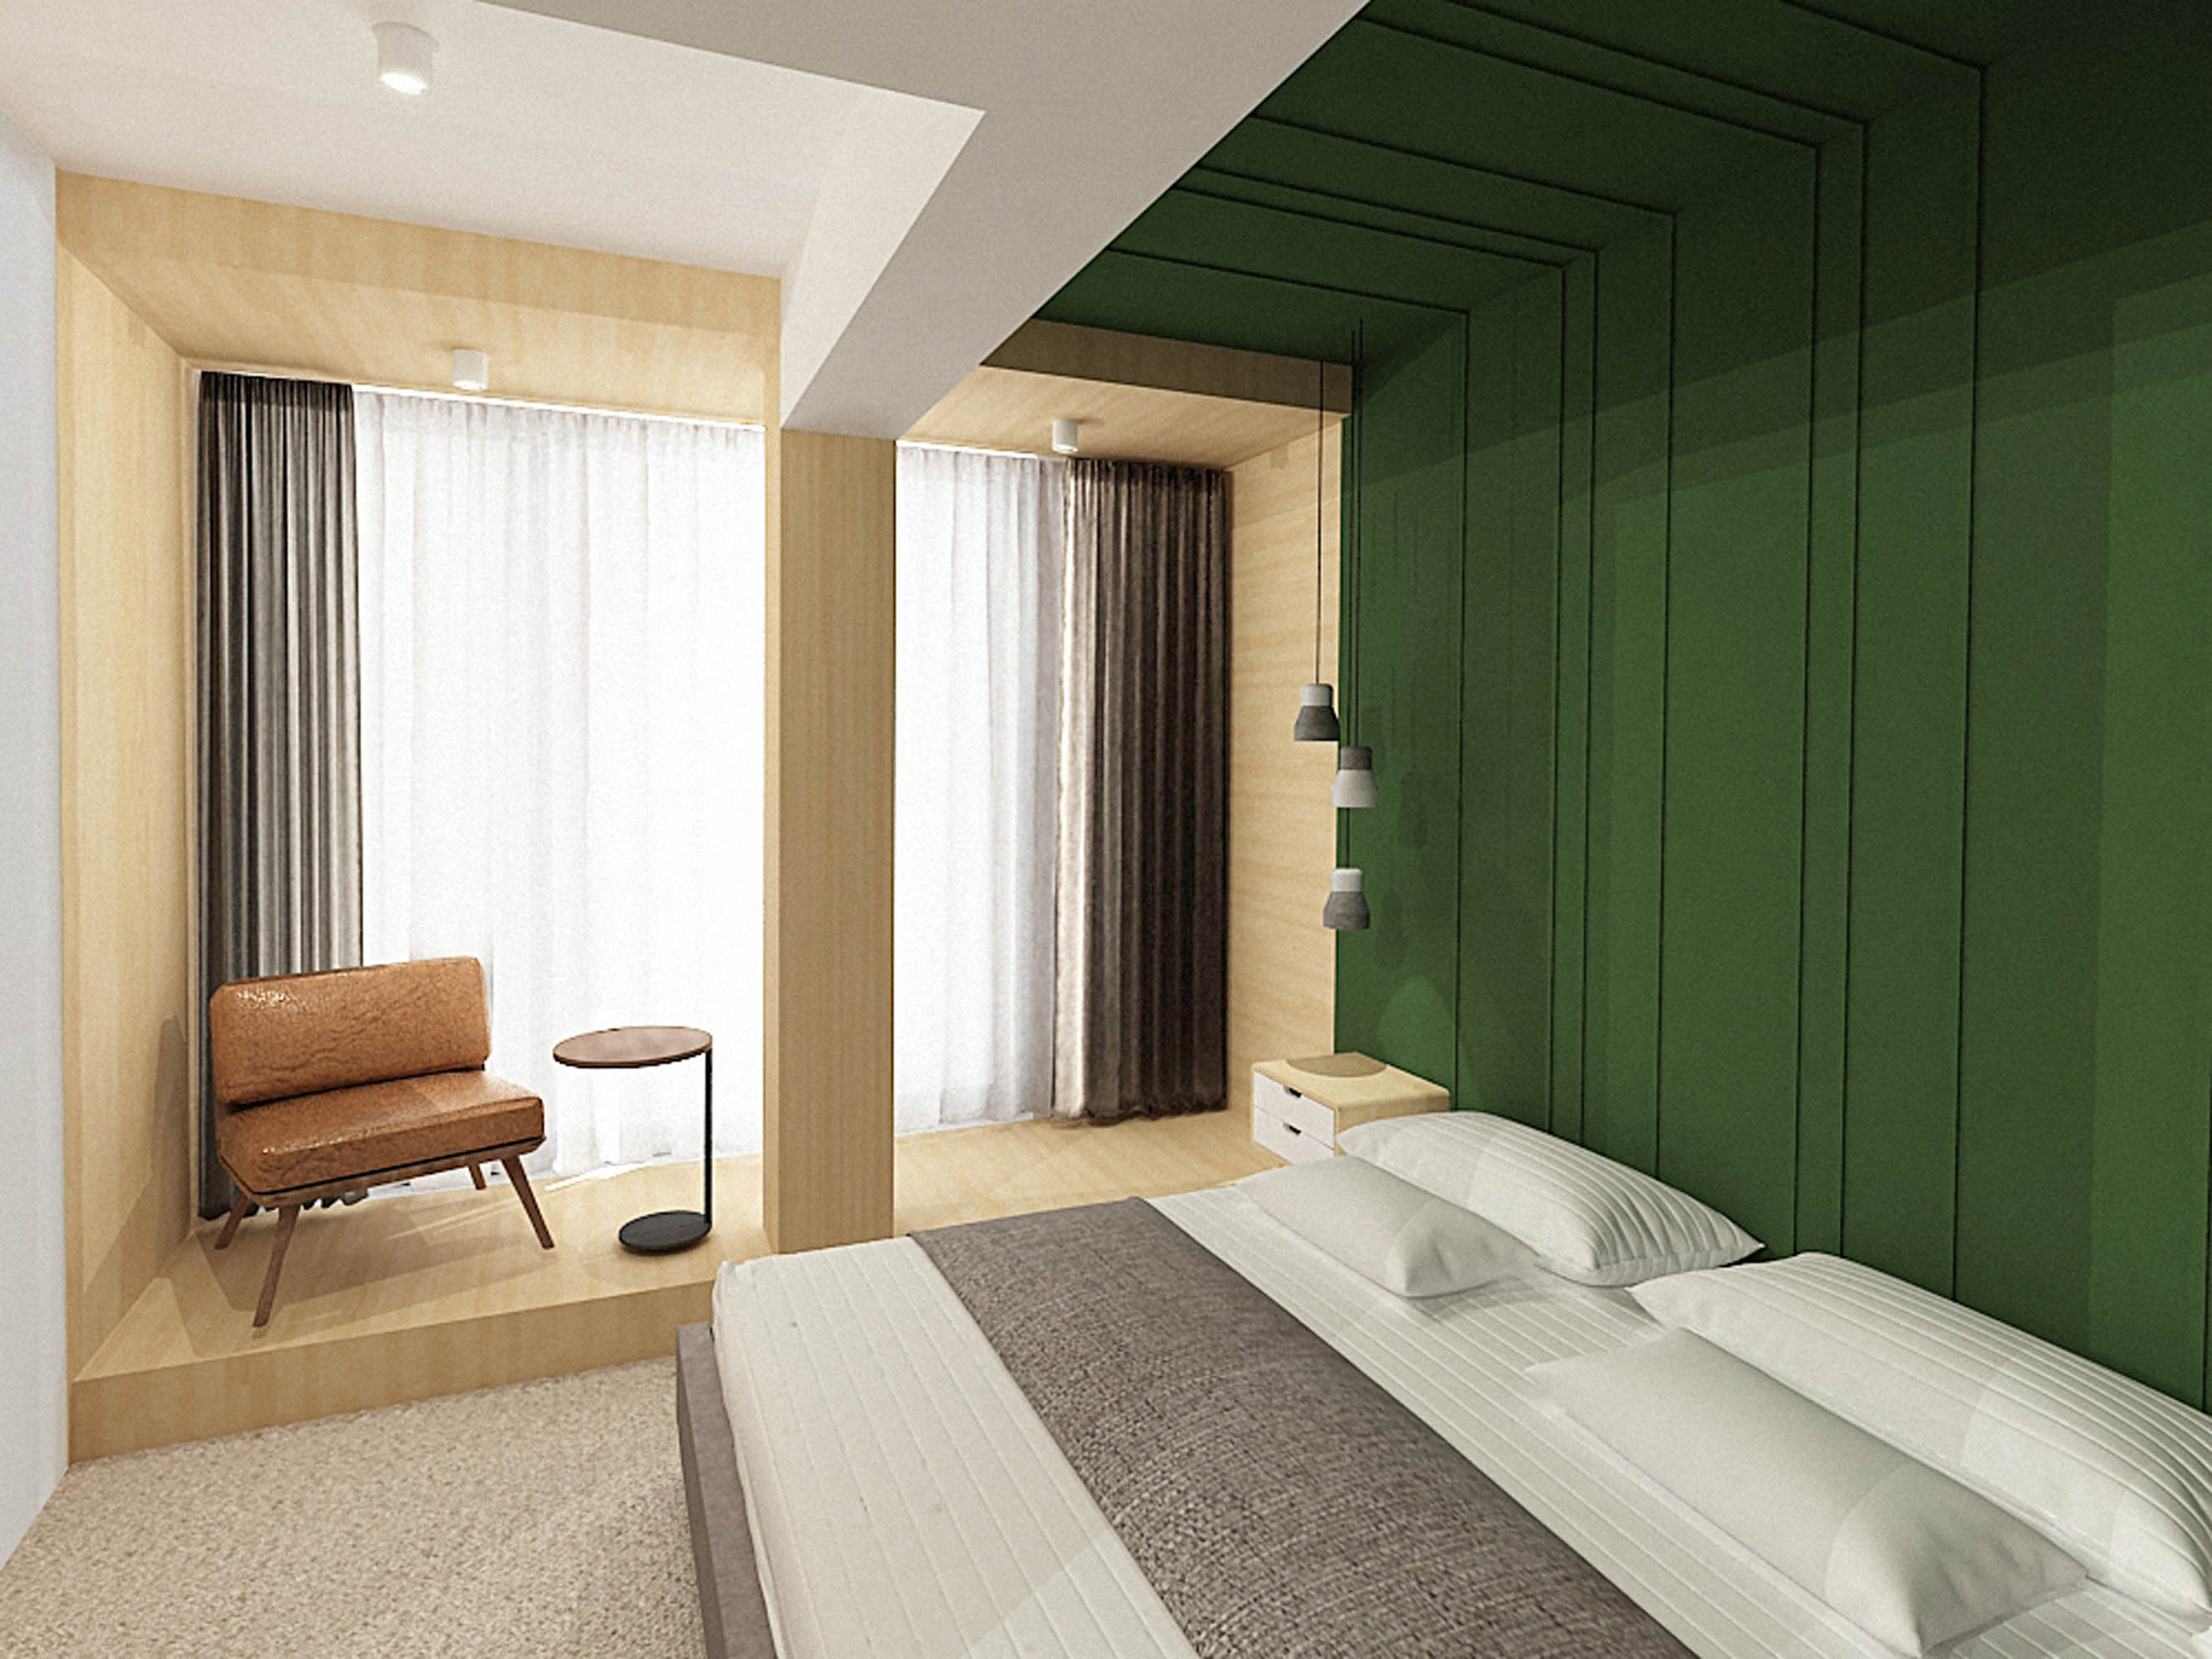 Modern minimalist bedroom with green color block and wooden panel walls